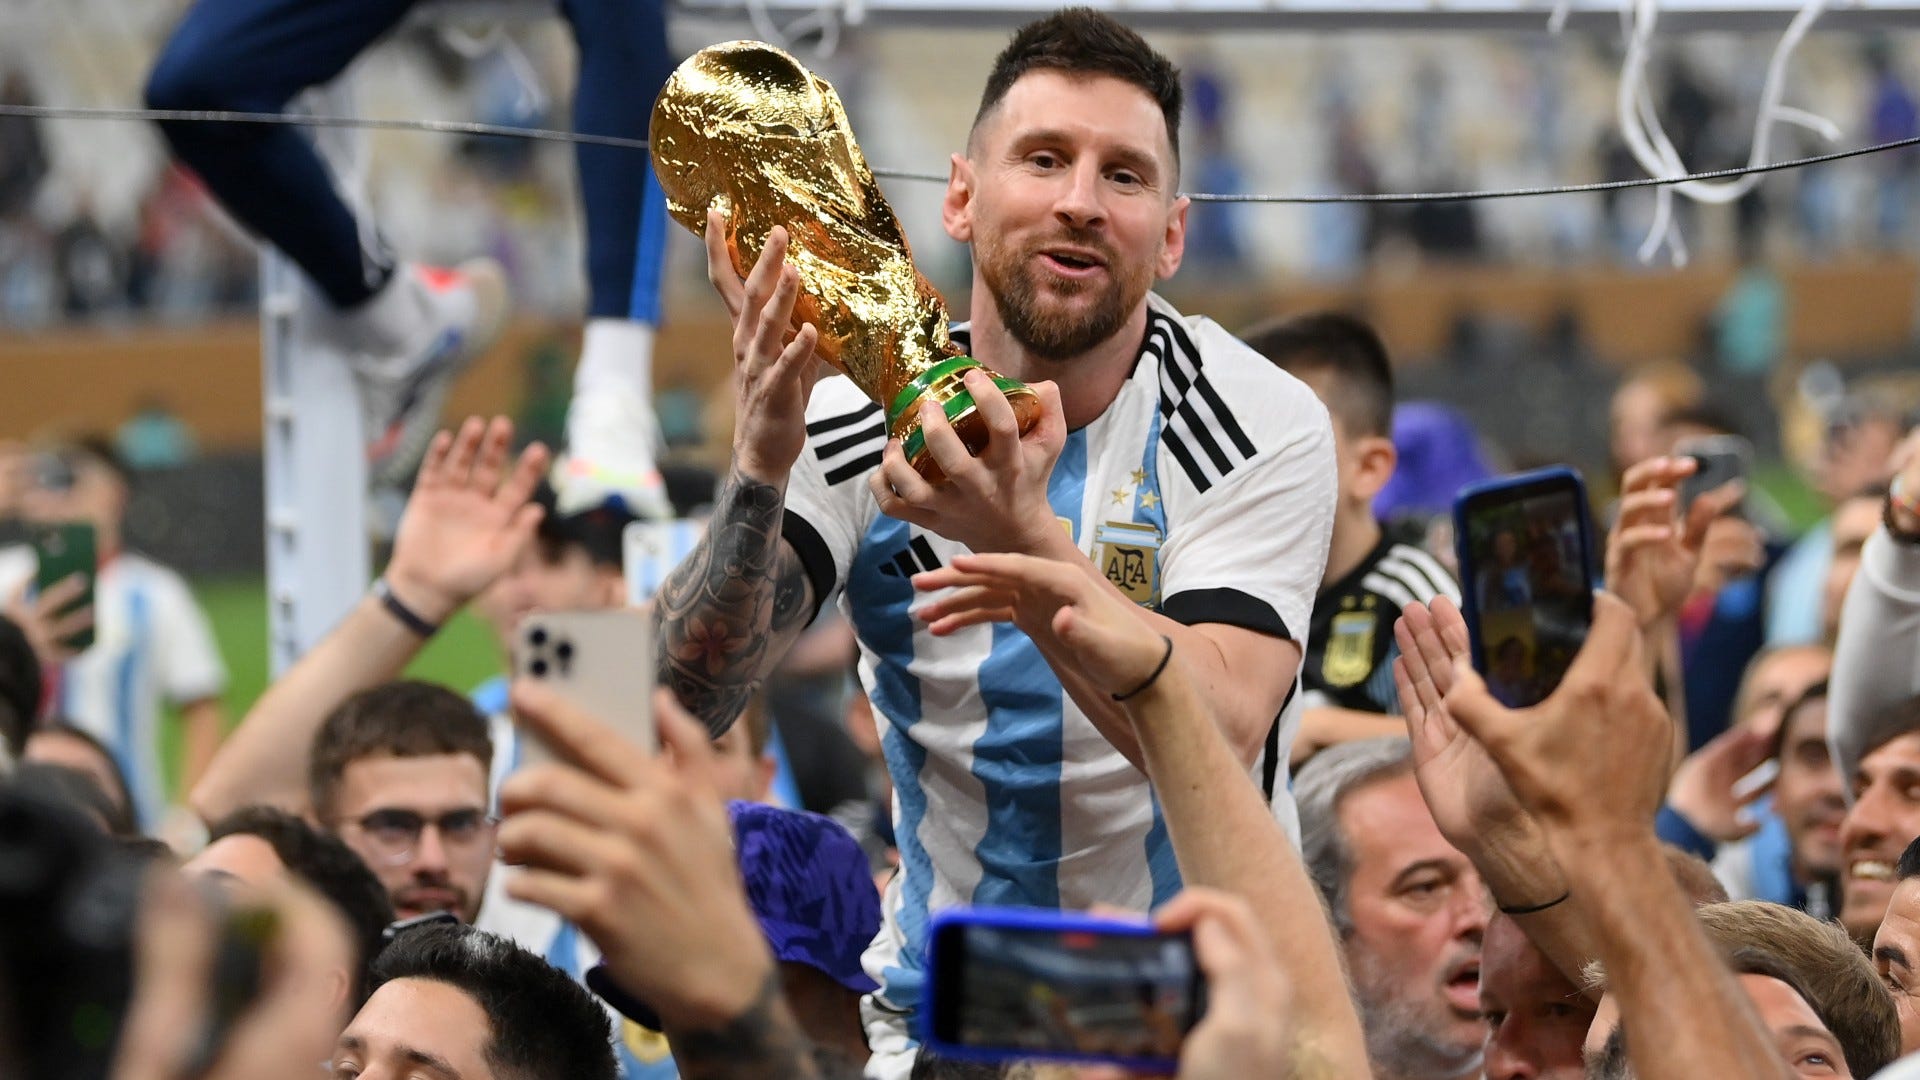 'There's nothing left' - Lionel Messi admits he's 'achieved everything' after lifting World Cup with Argentina